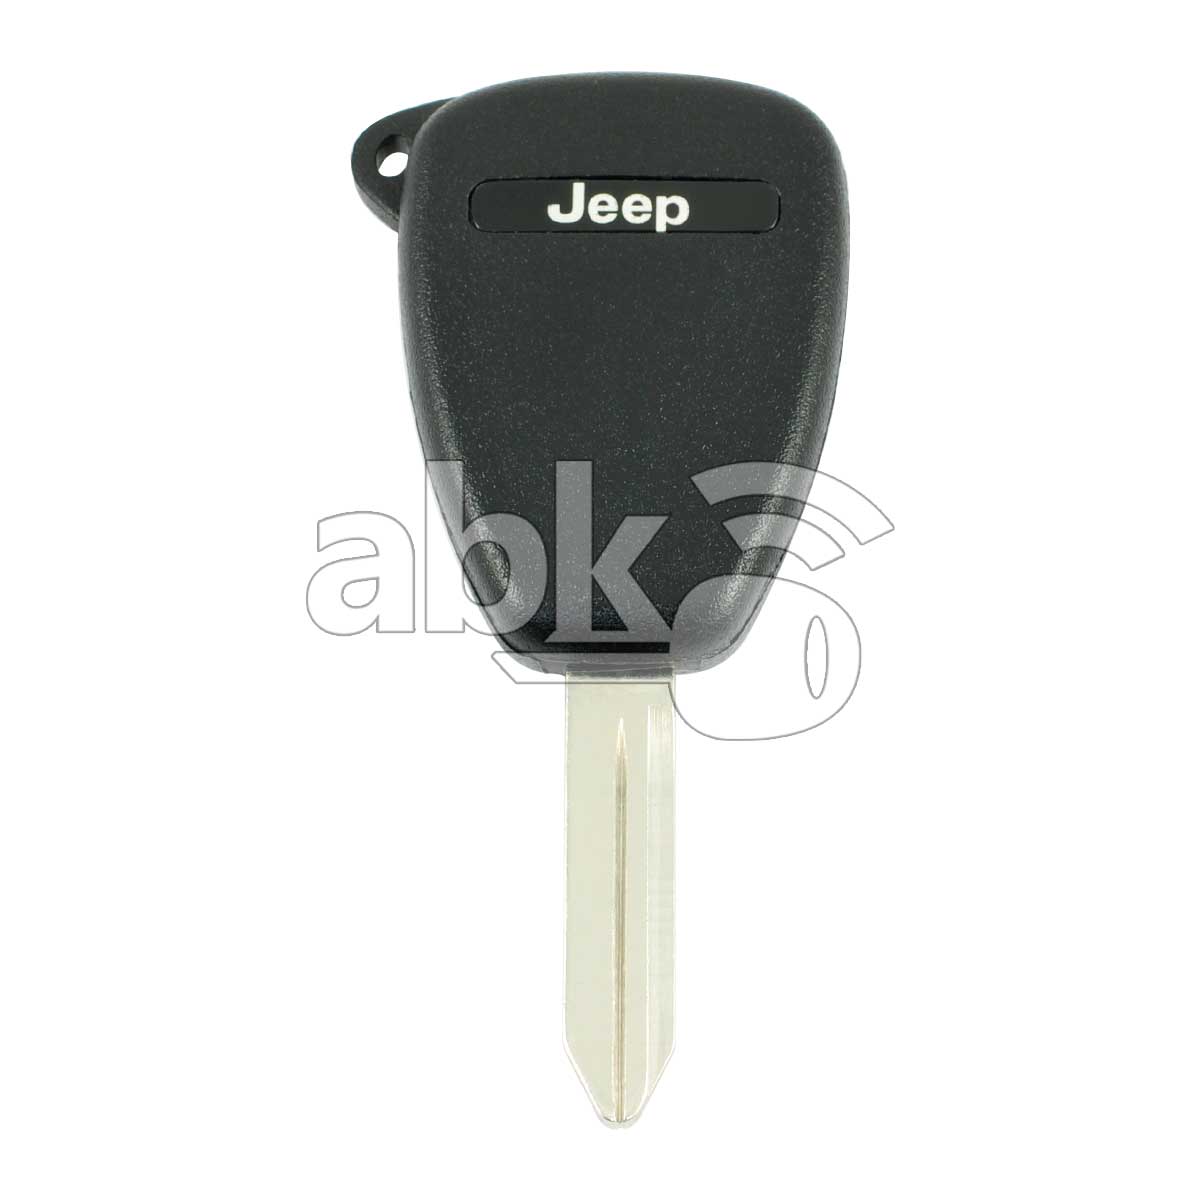 Genuine Jeep Compass Patriot 2007+ Key Head Remote 3Buttons OHT692427AA 315MHz CY22 68000603AA - 